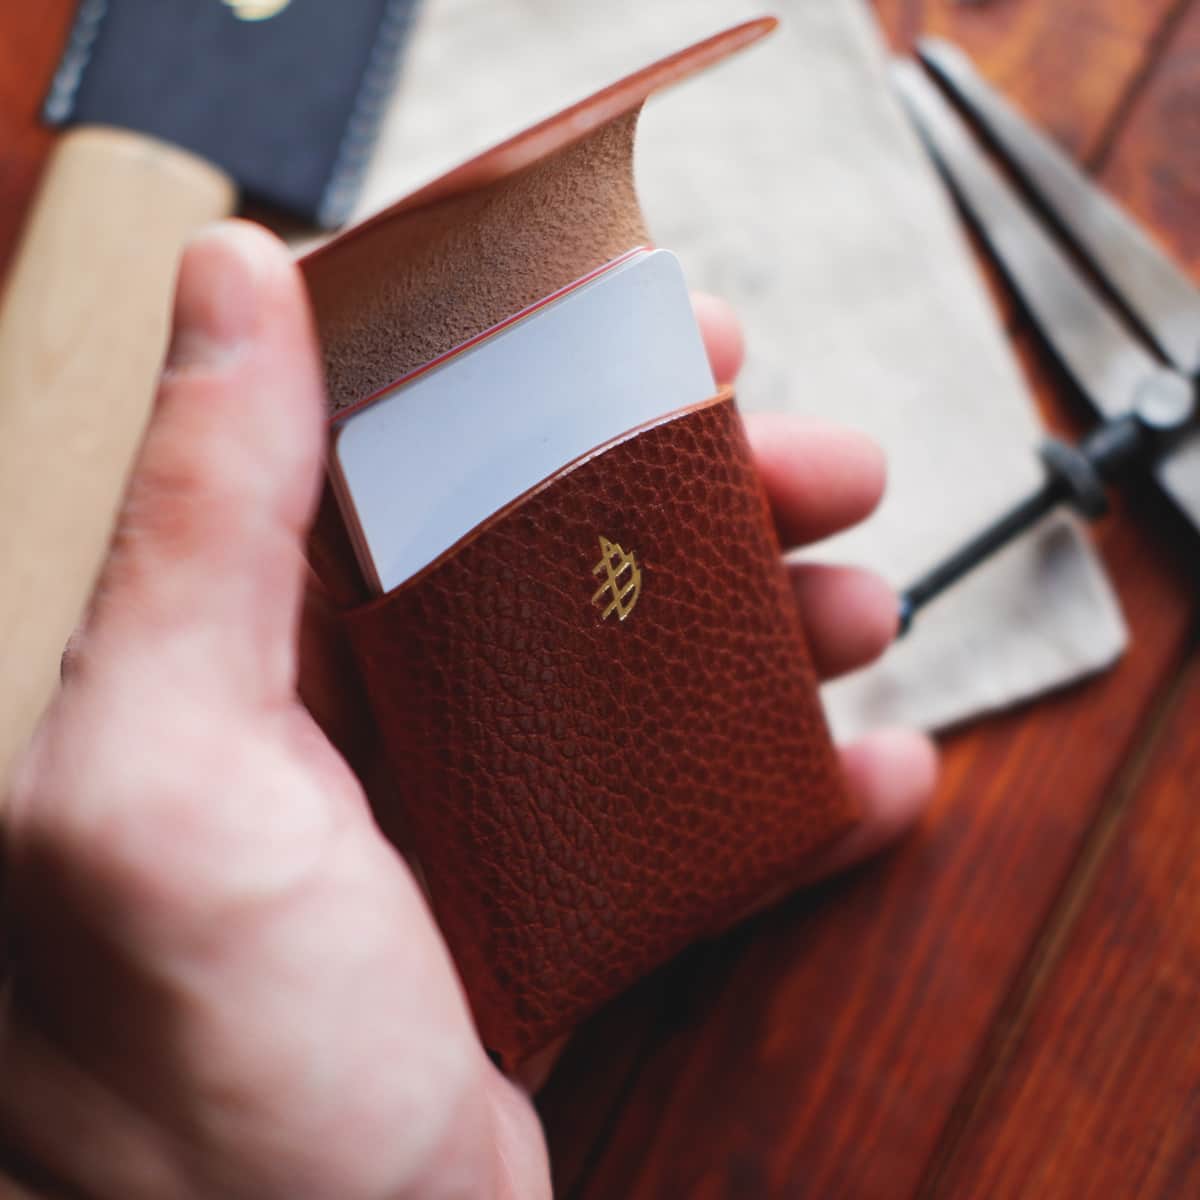 The Mini Lodgepole Stitchless Wallet in Brandy Dollaro leather held in hand with credit cards inside